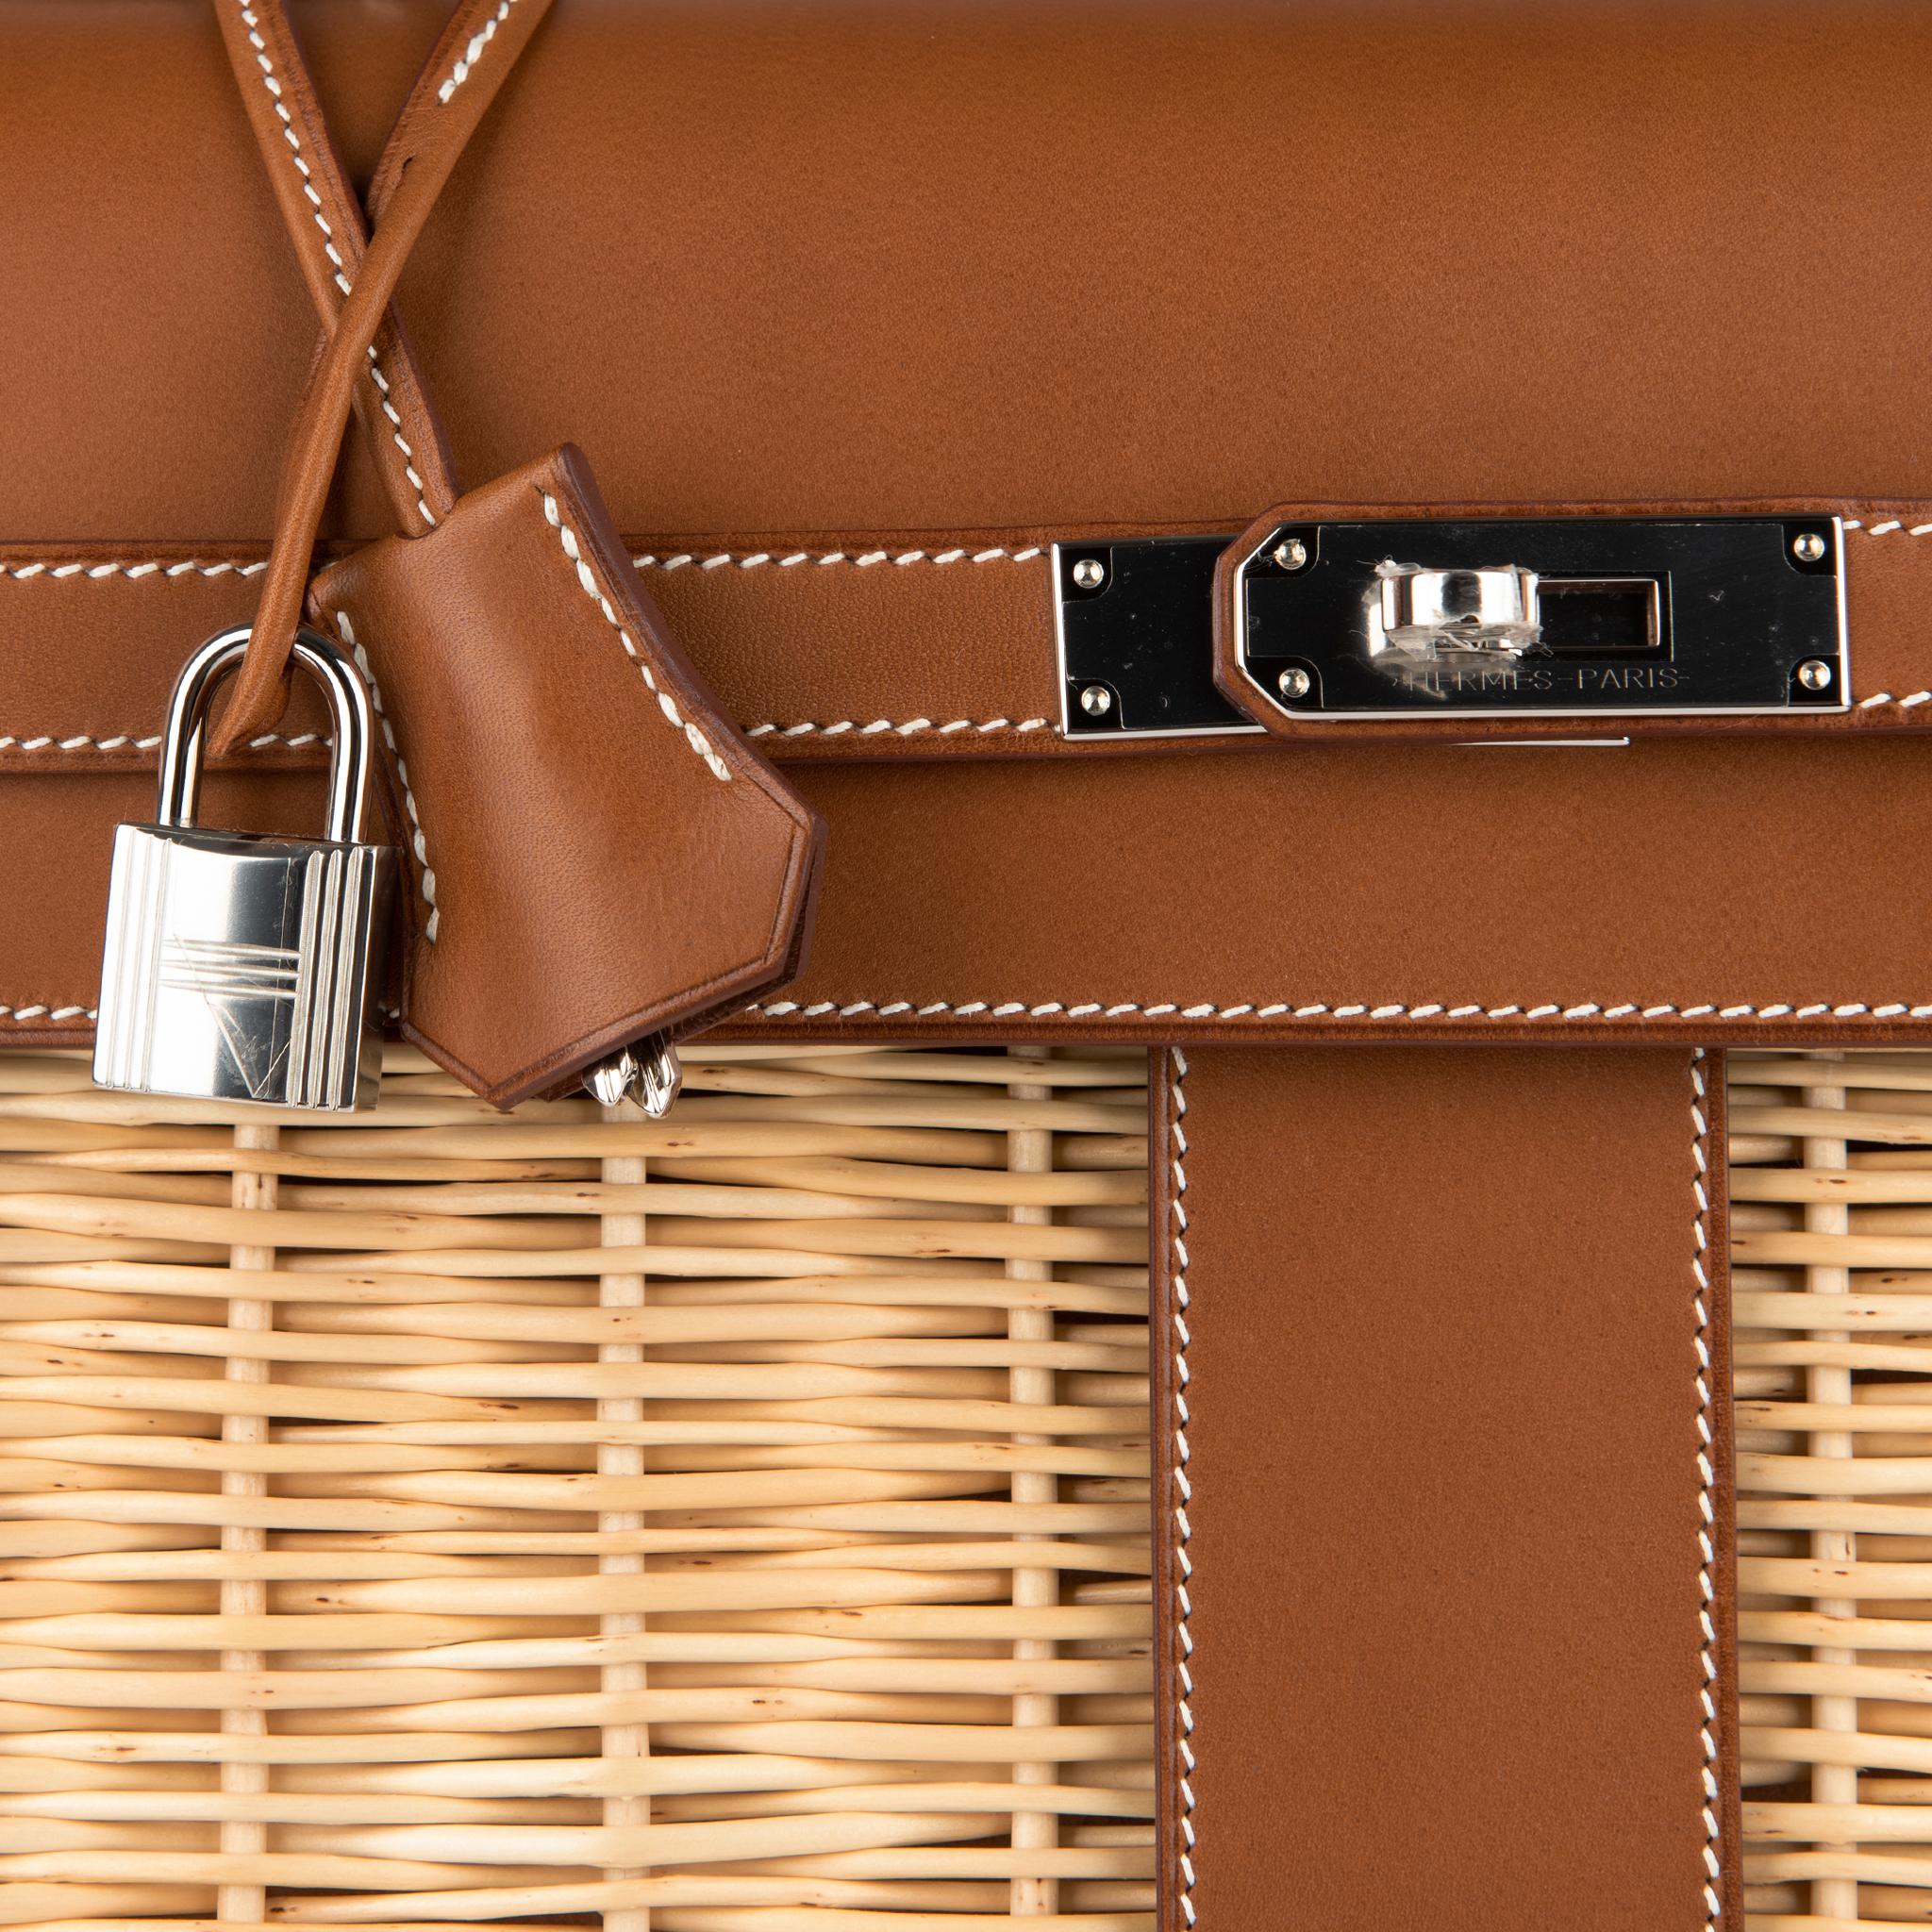 1stdibs Exclusives From Three Over Six

Brand: Hermès 
Style: Kelly Picnic Oiser
Size: 35cm
Color: Fauve
Leather: Barenia and Wicker 
Hardware: Palladium
Stamp: 2019 D

Condition: Pristine, never carried: The item has never been carried and is in